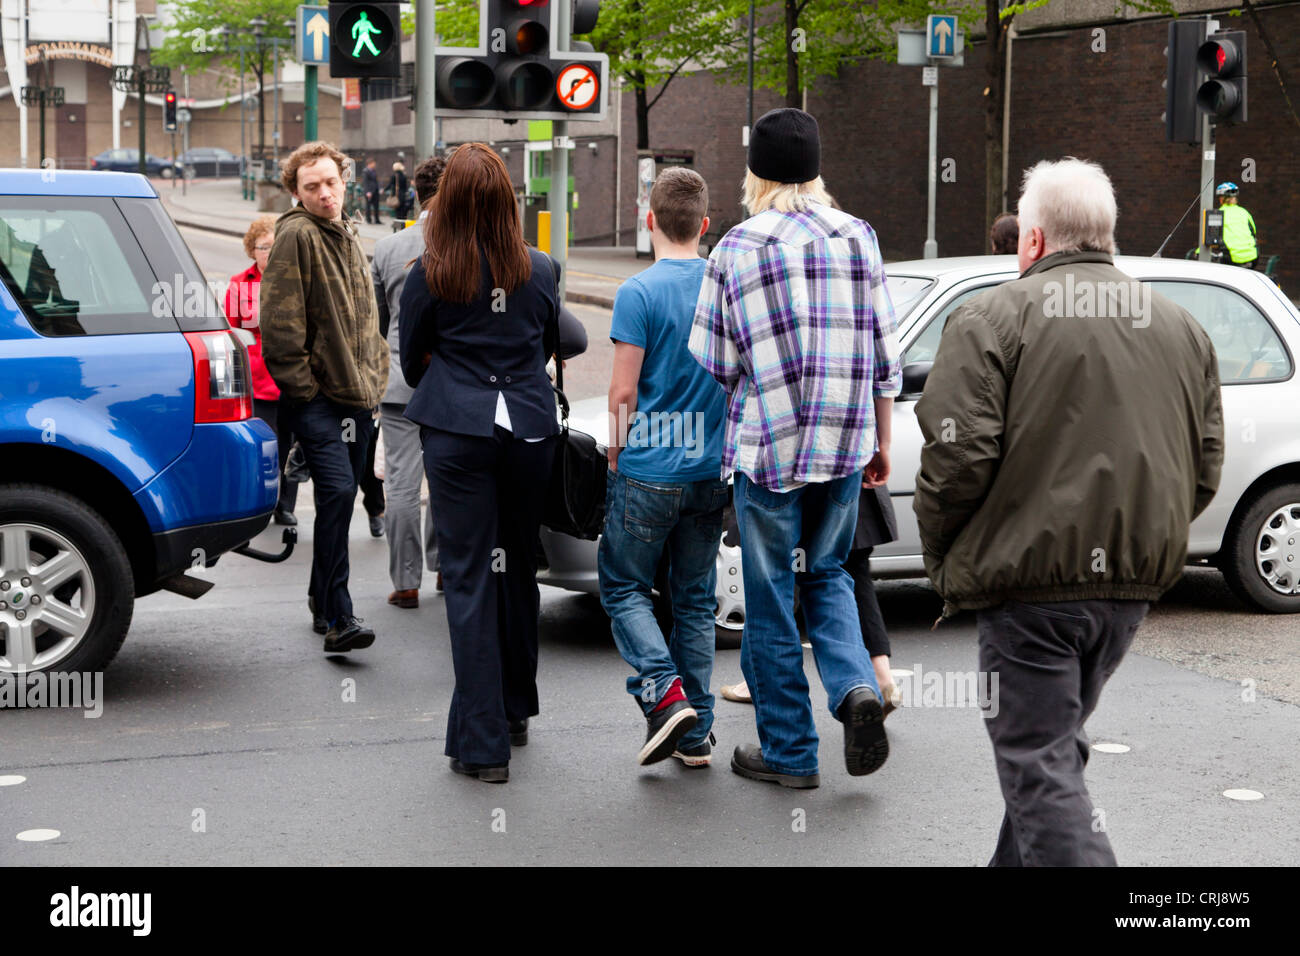 Traffic stopped across a pedestrian crossing on a road while the green man light shows, causing people to walk between cars. Nottingham, England, UK Stock Photo